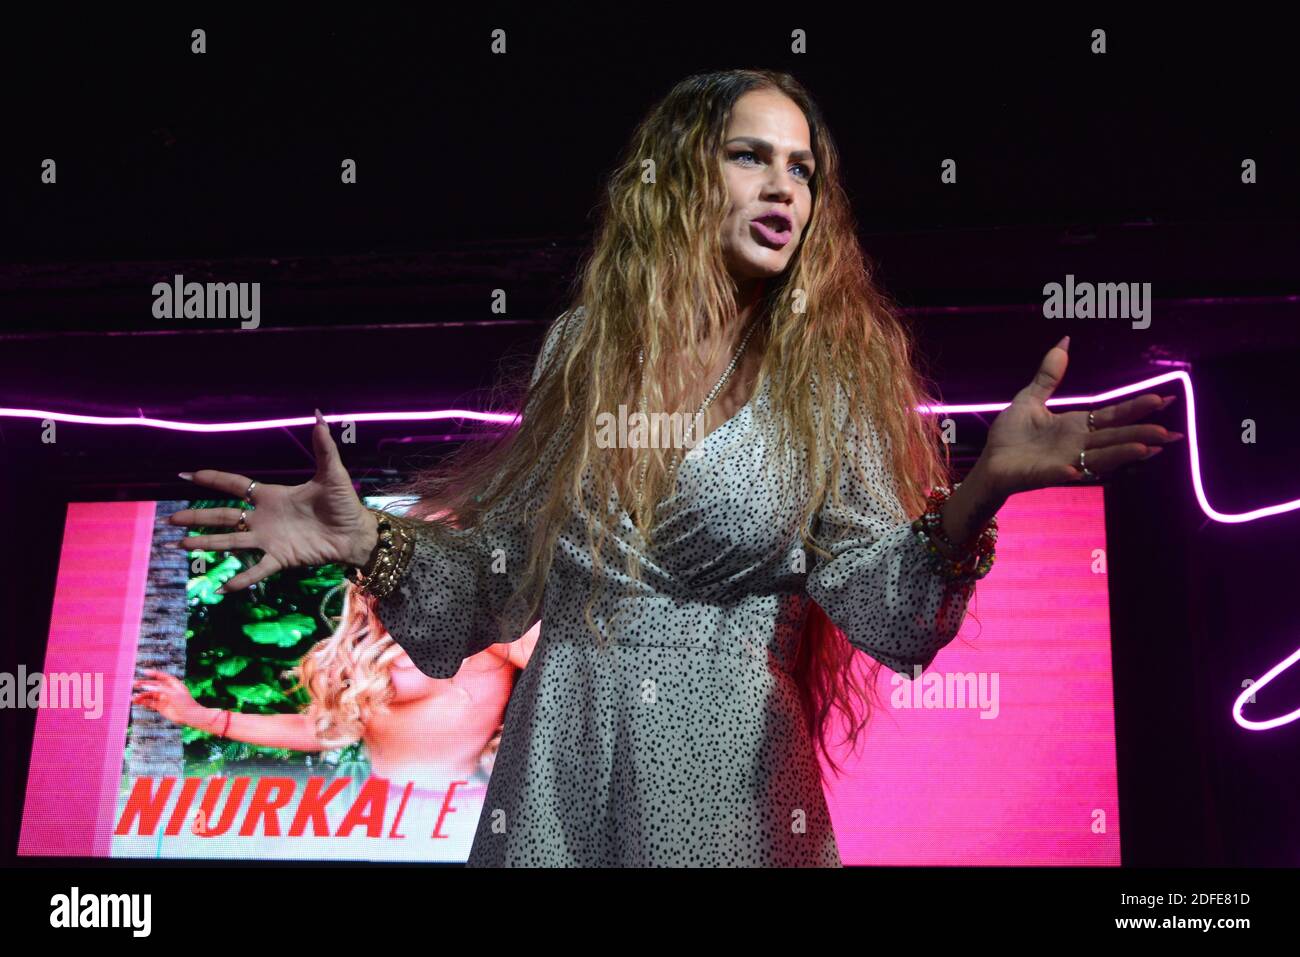 Mexico City, Mexico. 03rd Dec, 2020. Actress Niurka Marcos poses for photos during a press conference to launch her calendar ‘Niurkalendar' at Rico Club. (Photo by Eyepix Group/Pacific Press) Credit: Pacific Press Media Production Corp./Alamy Live News Stock Photo